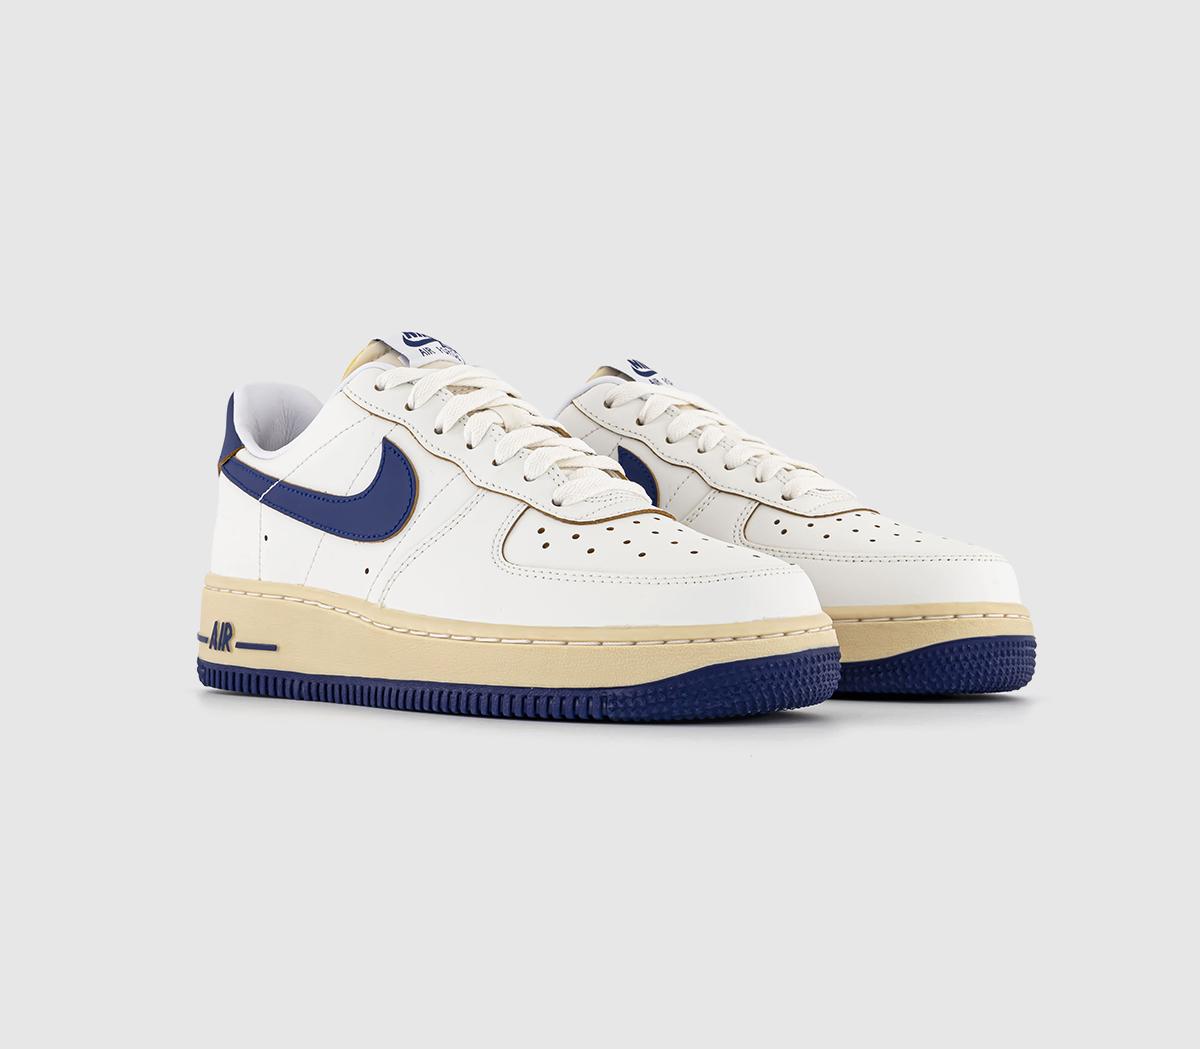 Nike Womens Air Force 1 07 Trainers Sail Deep Royal Blue Pale Vanilla Gold Suede White, 7.5